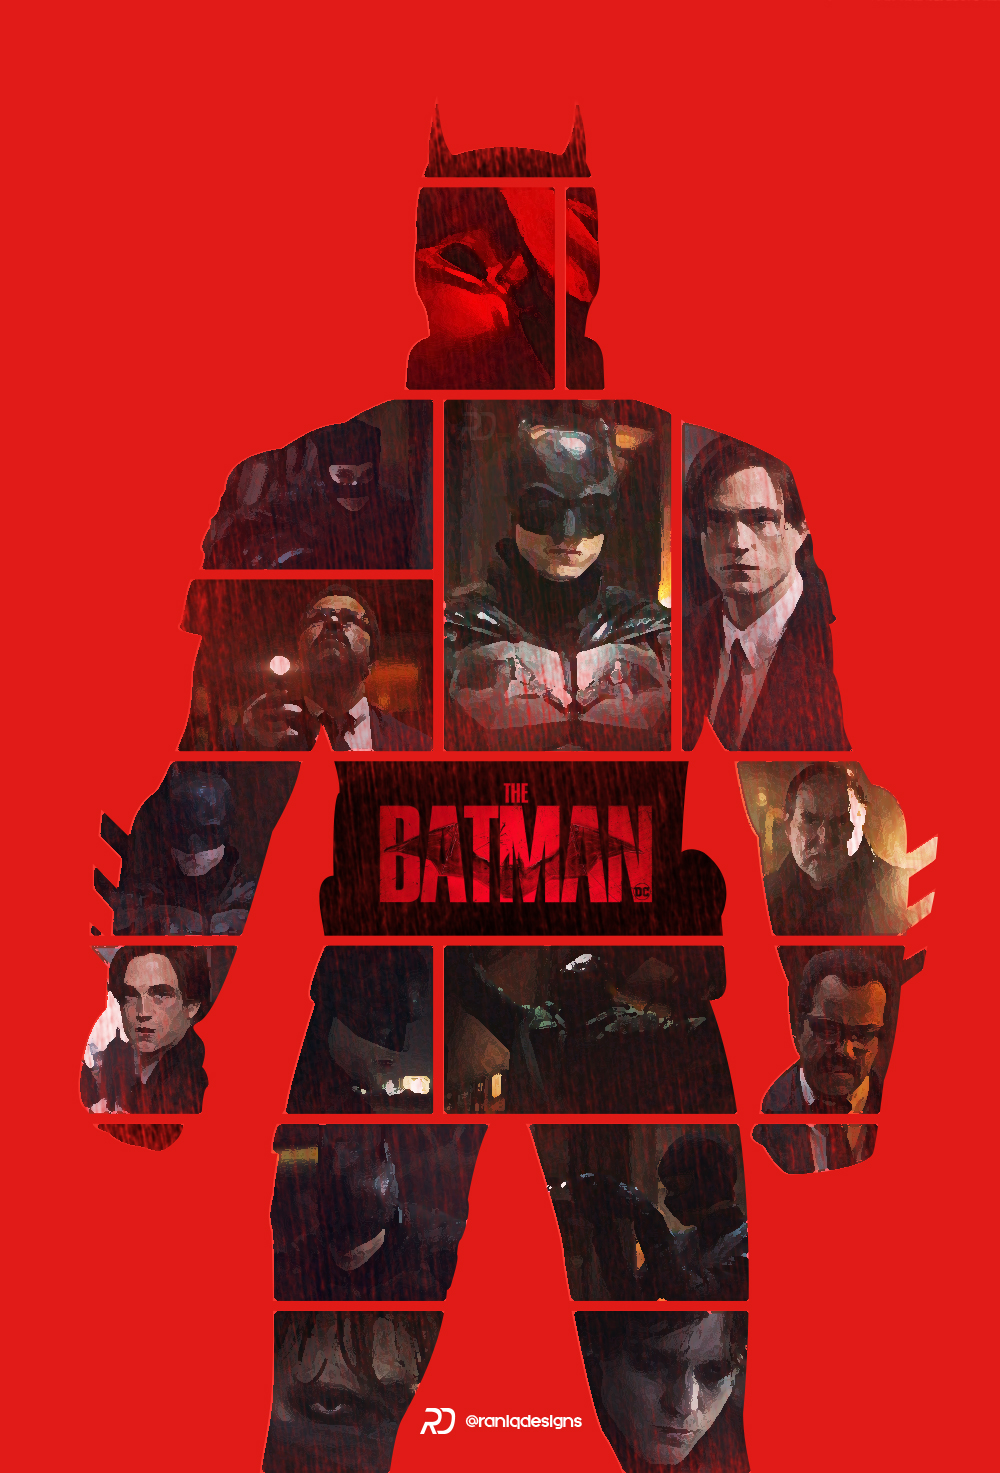 The Batman collage poster